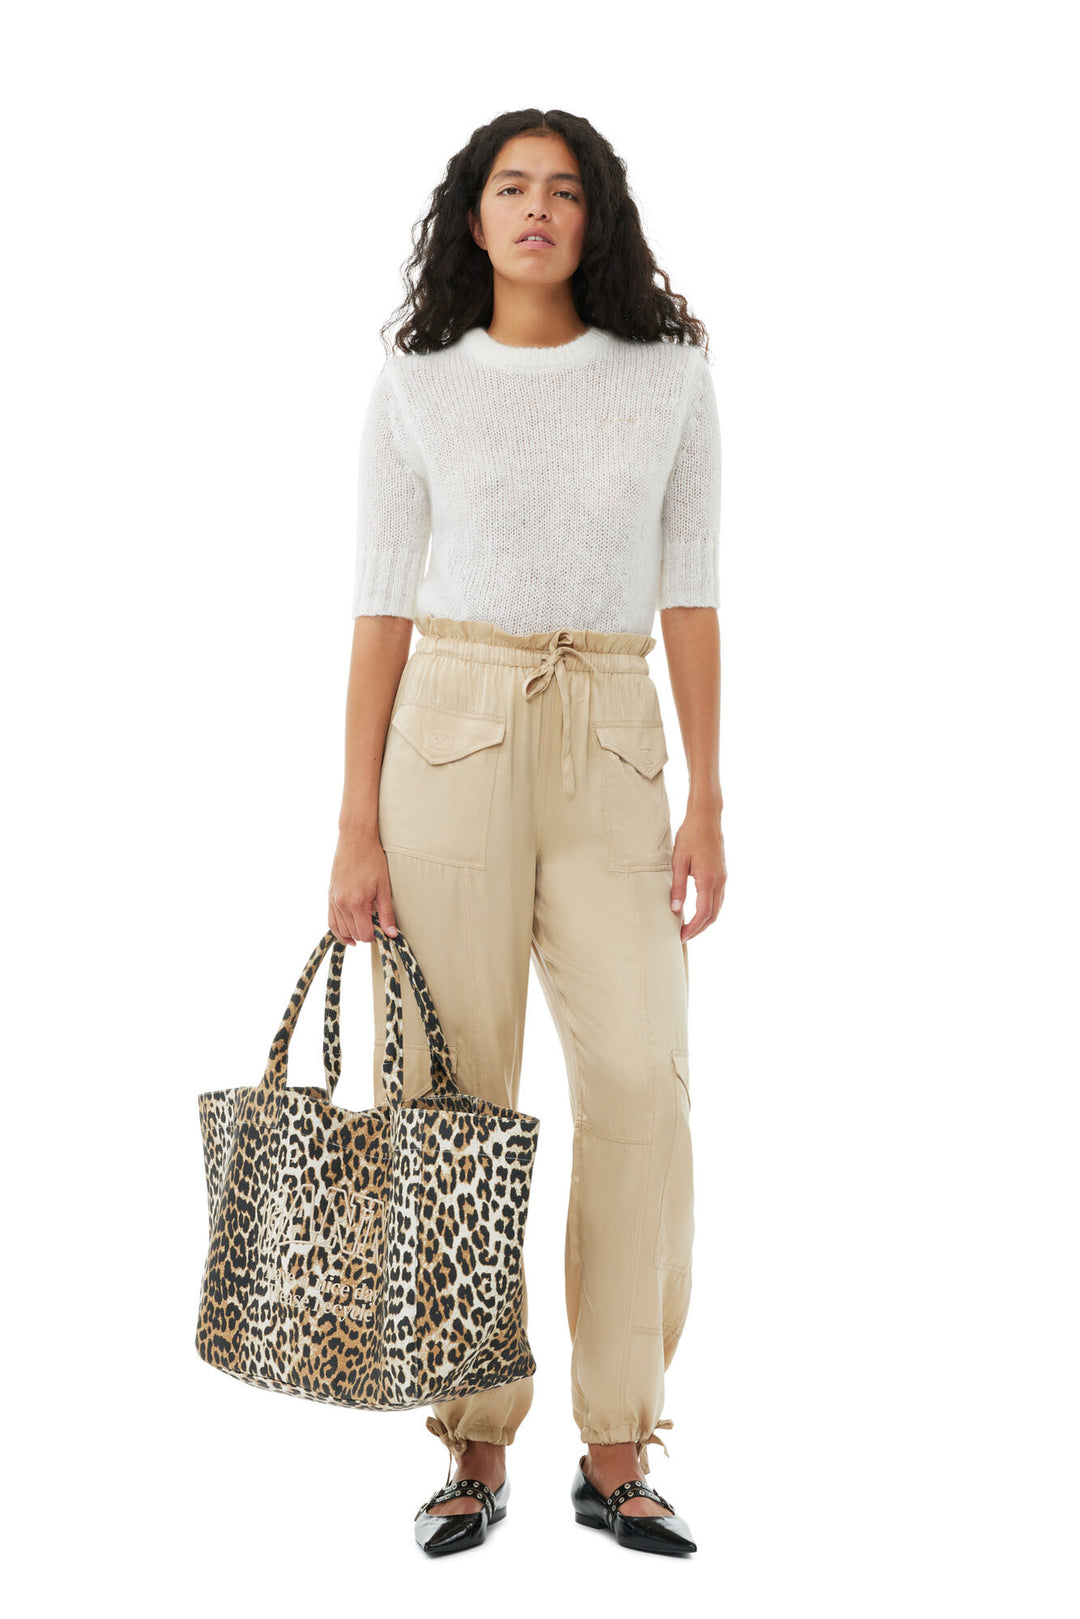 Oversized Canvas Tote Bag - Leopard